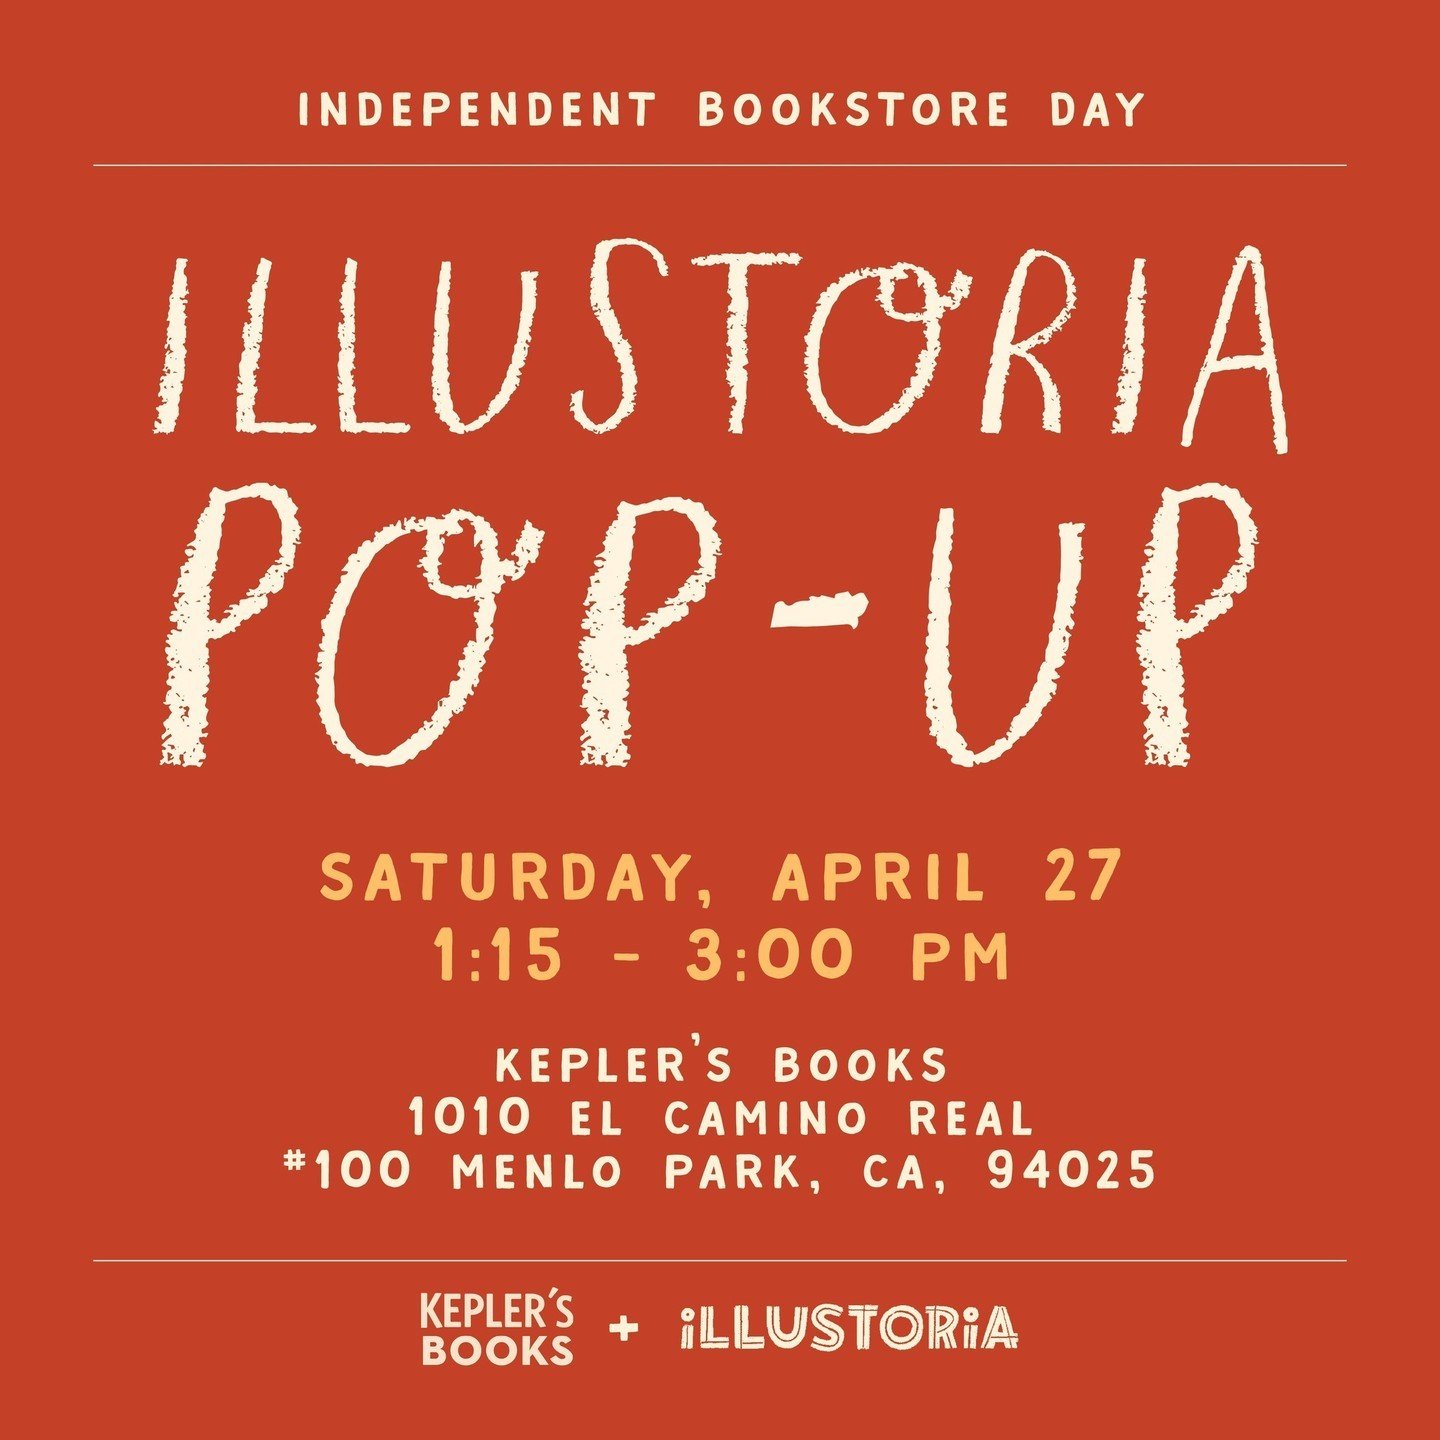 🥁 We are thrilled to join @keplersbooks on Saturday, April 27, for Independent Bookstore Day 🥁 ⁠
⁠
Join us as illustrator Jade Howe @jadehowdy leads a rad Animal Portrait Workshop 🐯✏️. Afterward, a troupe of incredible authors (including Dave Egge